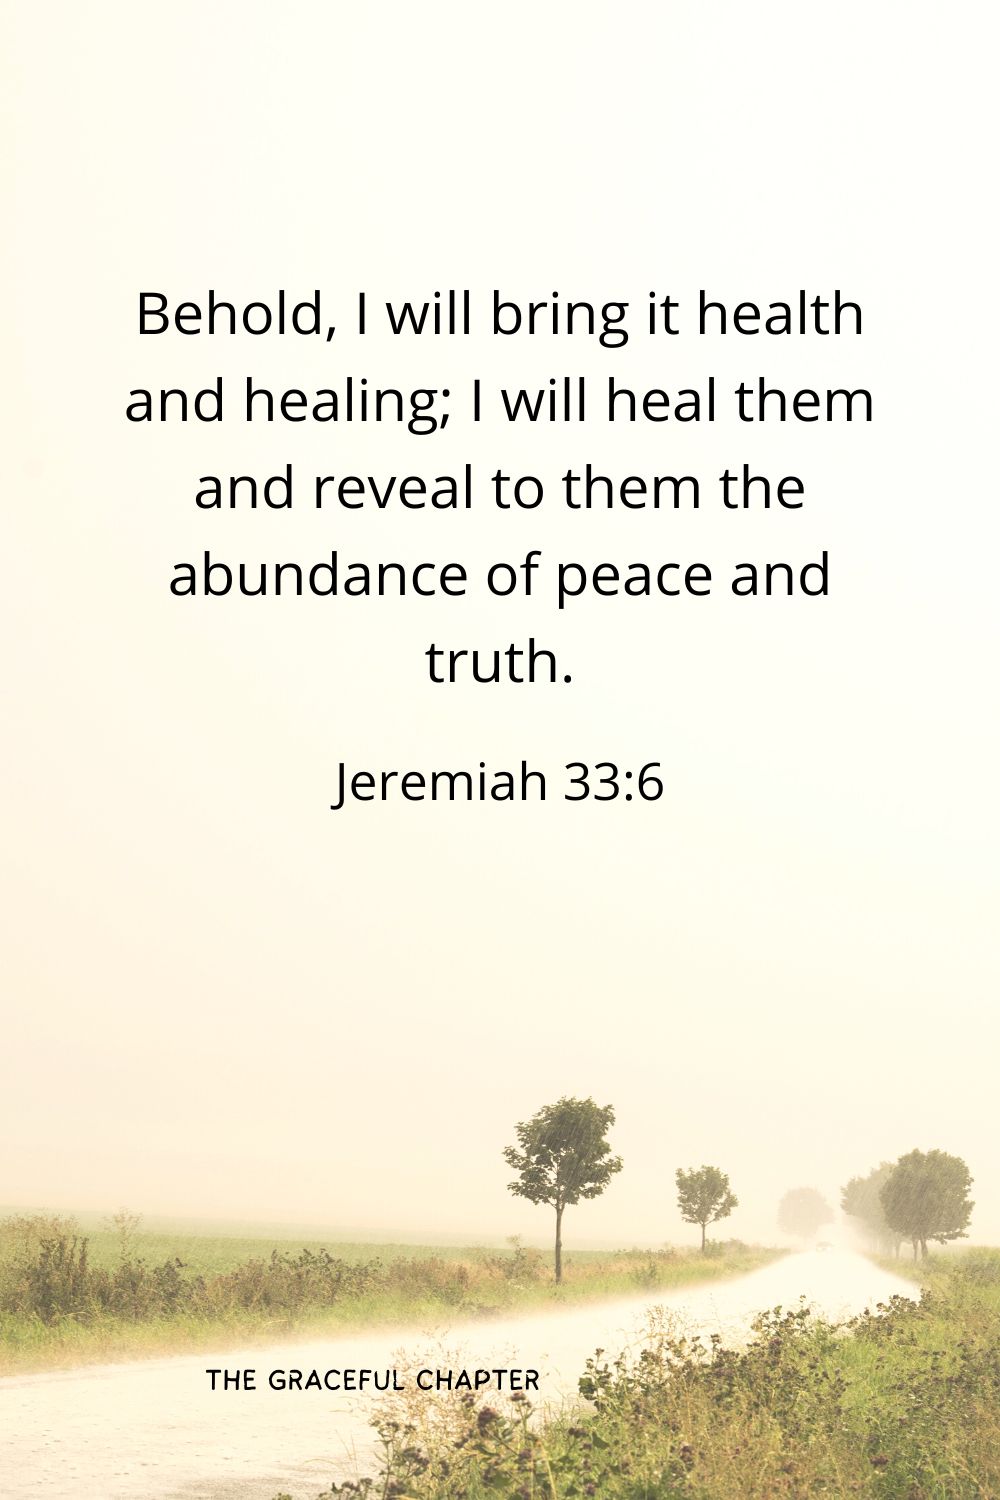 Behold, I will bring it health and healing; I will heal them and reveal to them the abundance of peace and truth.